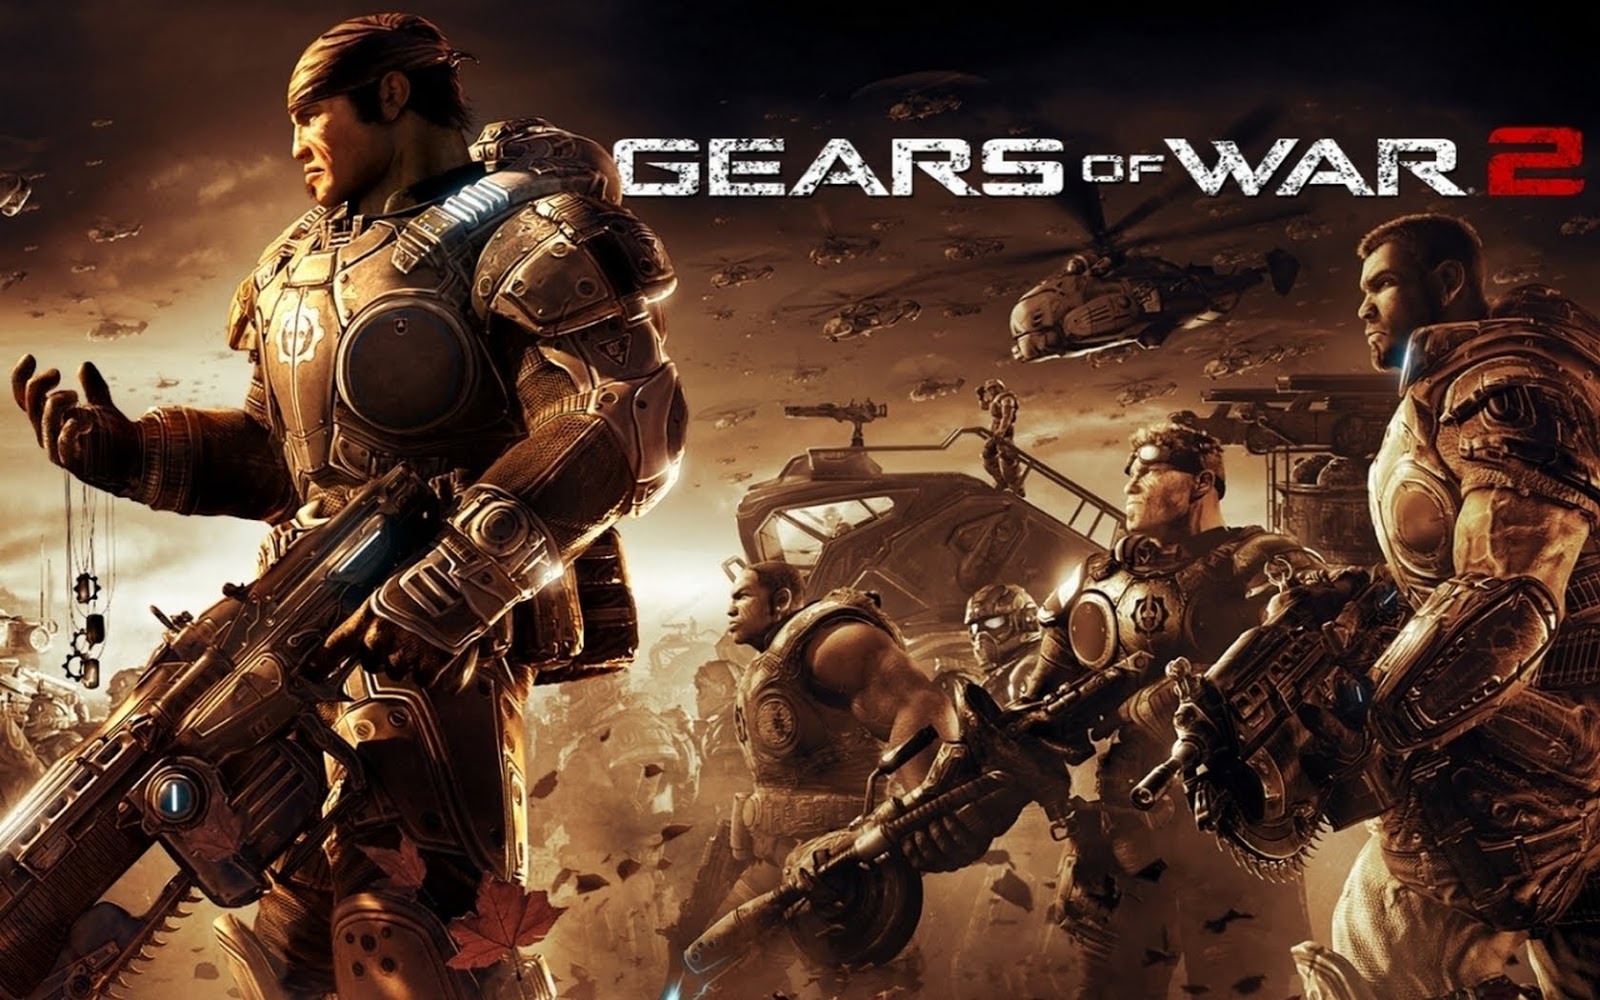 Bristolian Gamer: Gears of War 2 Review - "I have a rendezvous with death".